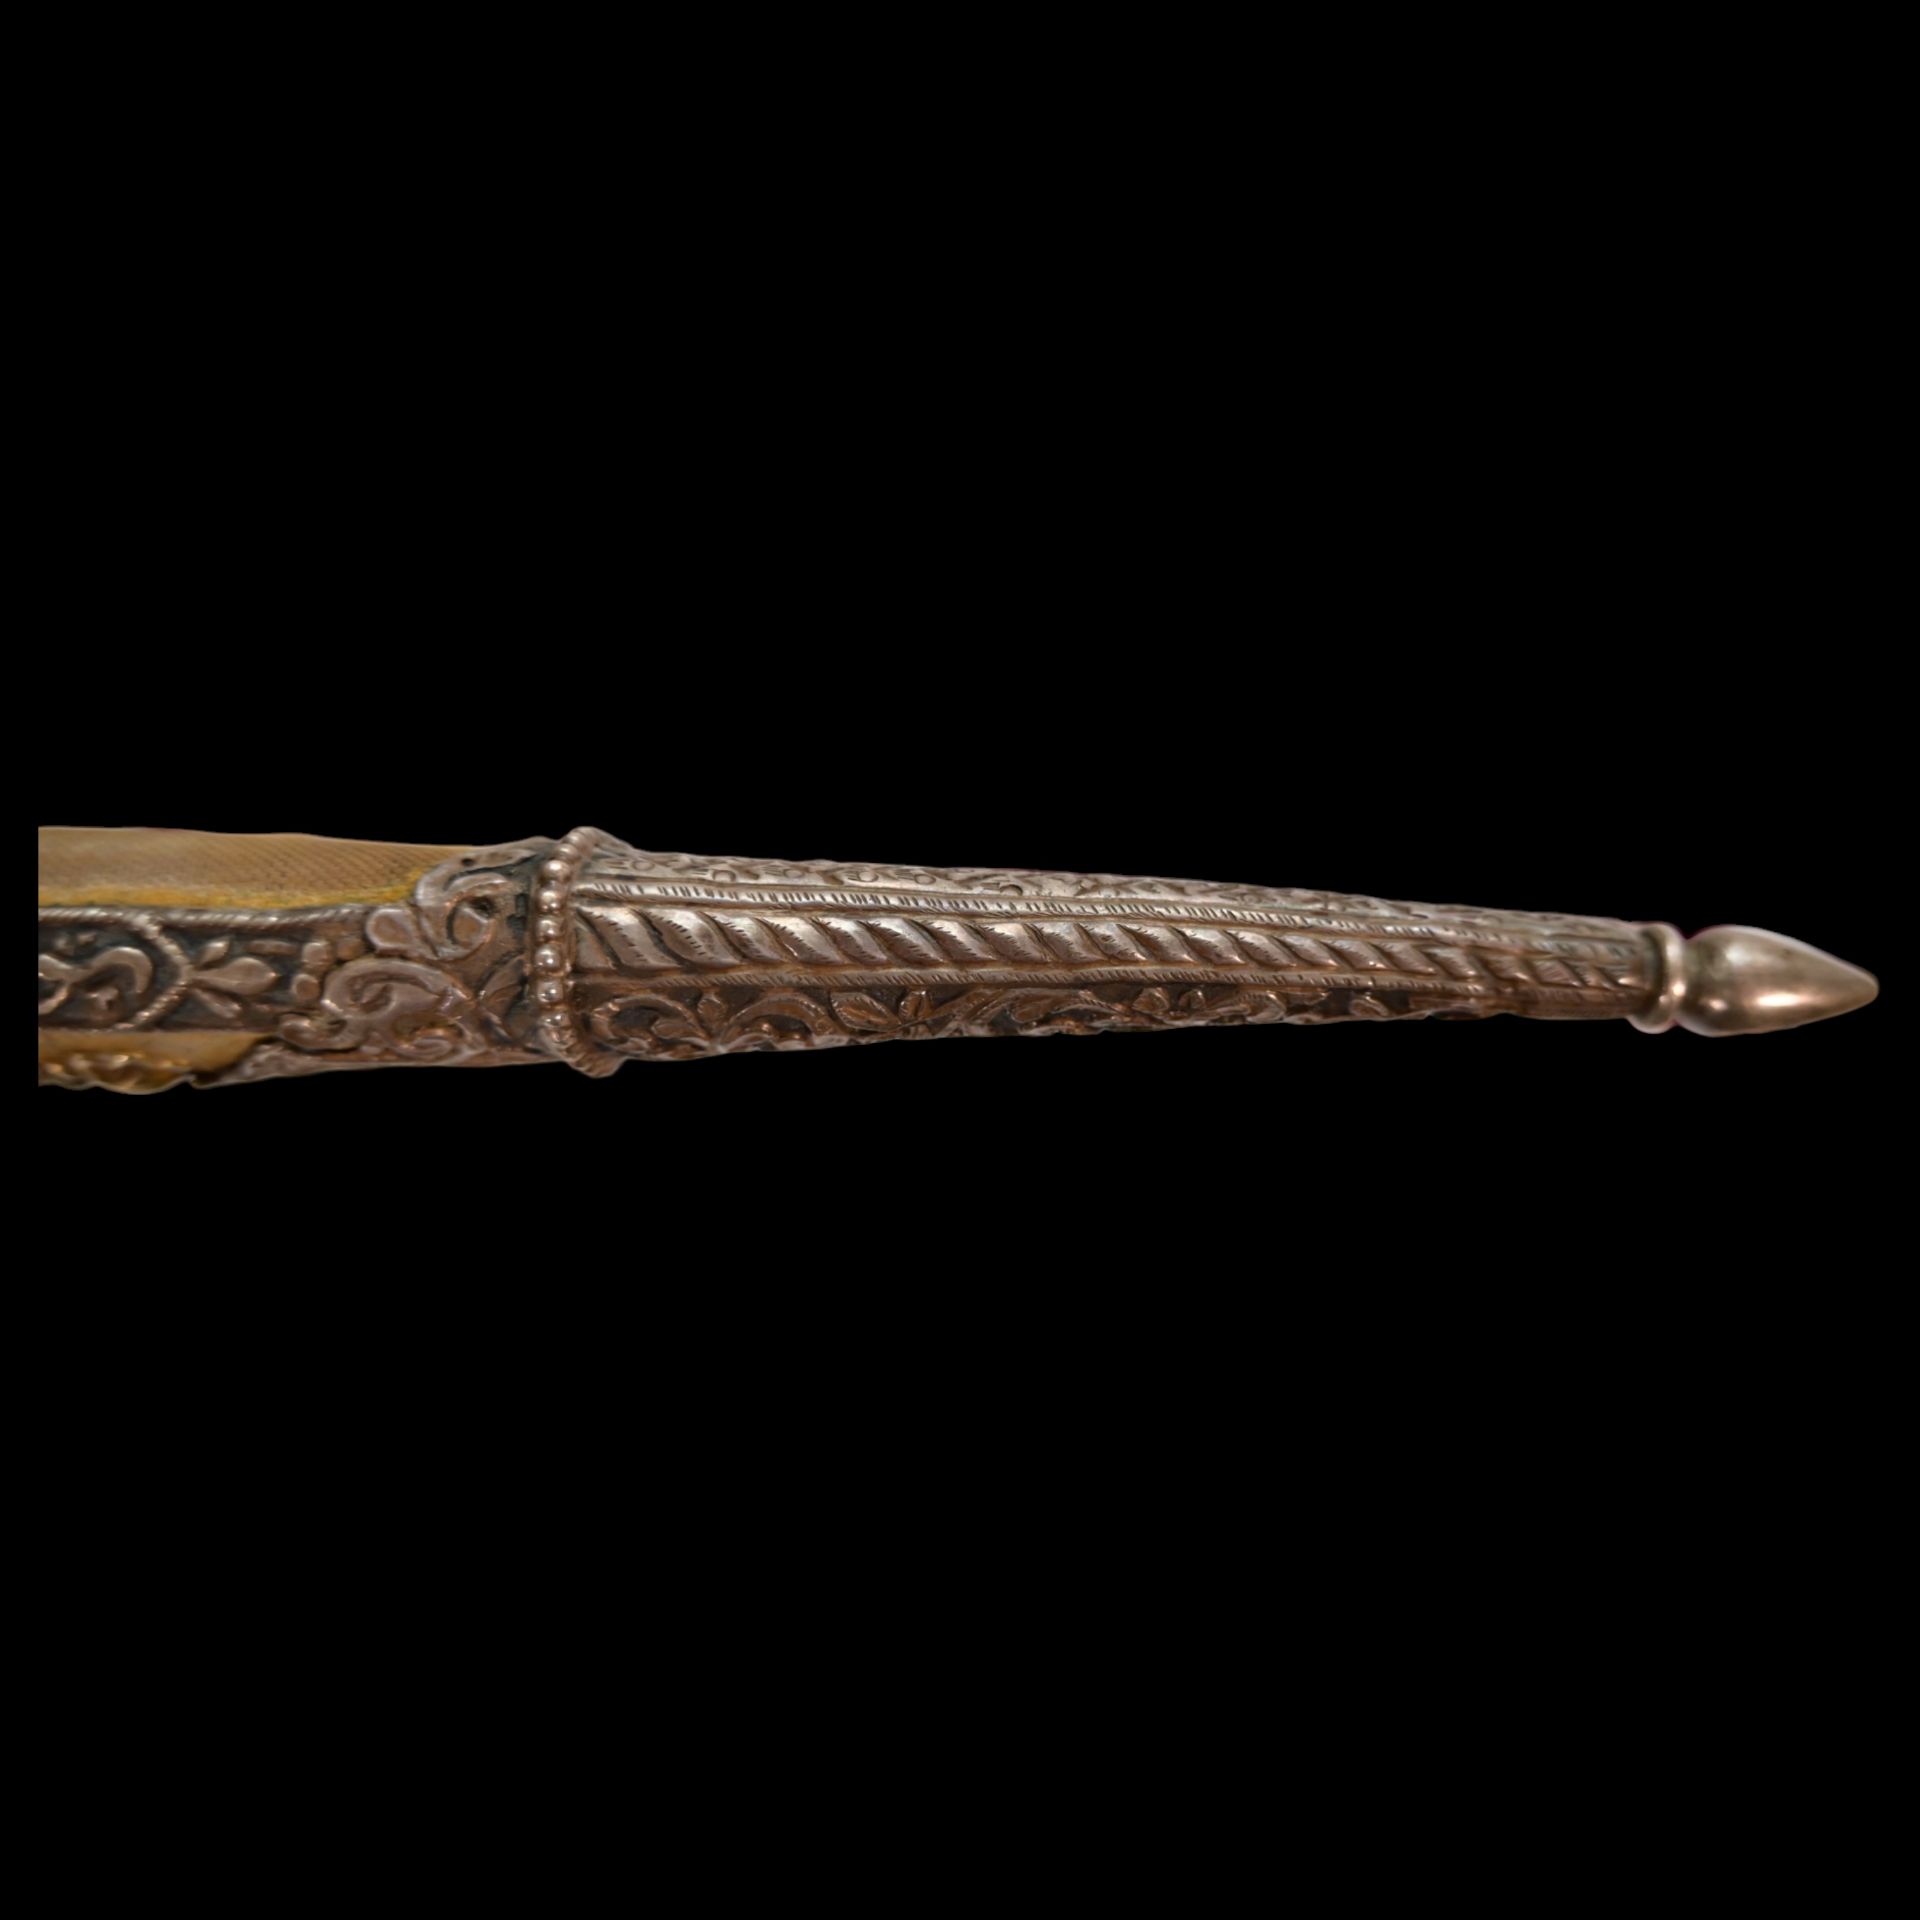 A PERSIAN ZAND DYNASTY KARD DAGGER WITH WOOTZ BLADE AND GOLD INLAY. - Image 9 of 27